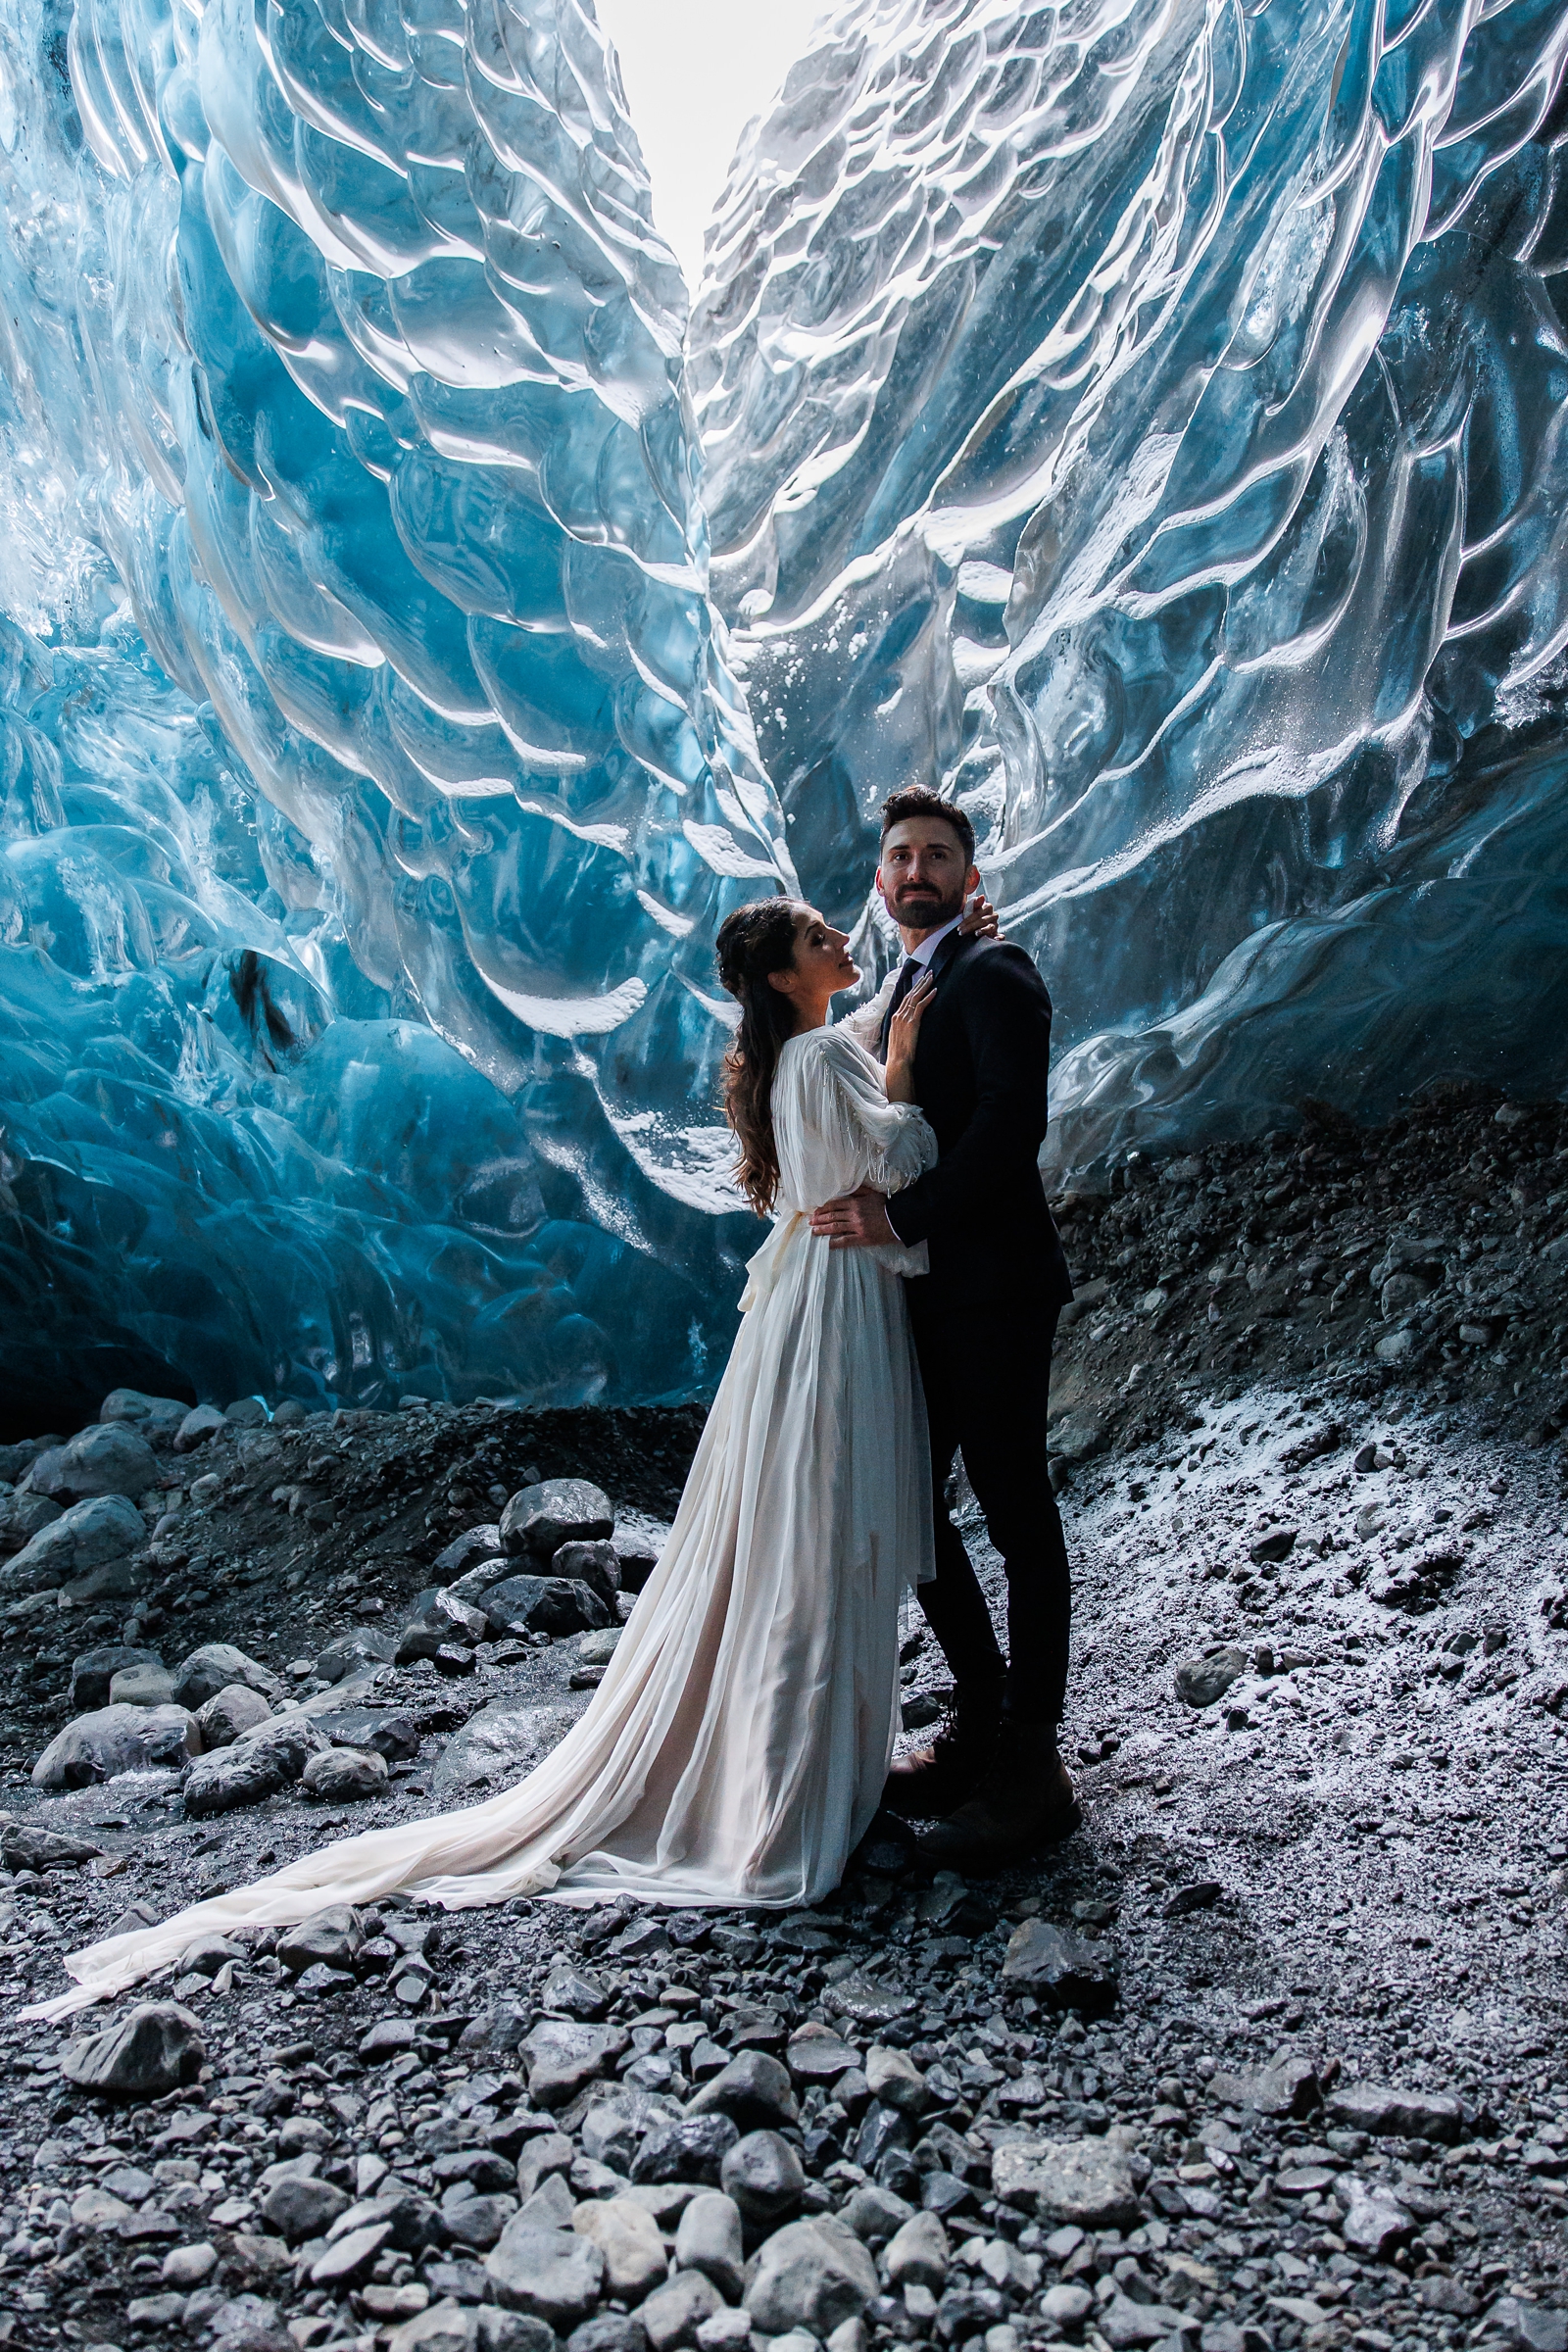 Ice within an ice cave frame an eloping couple in Breiðamerkurjökull Iceland